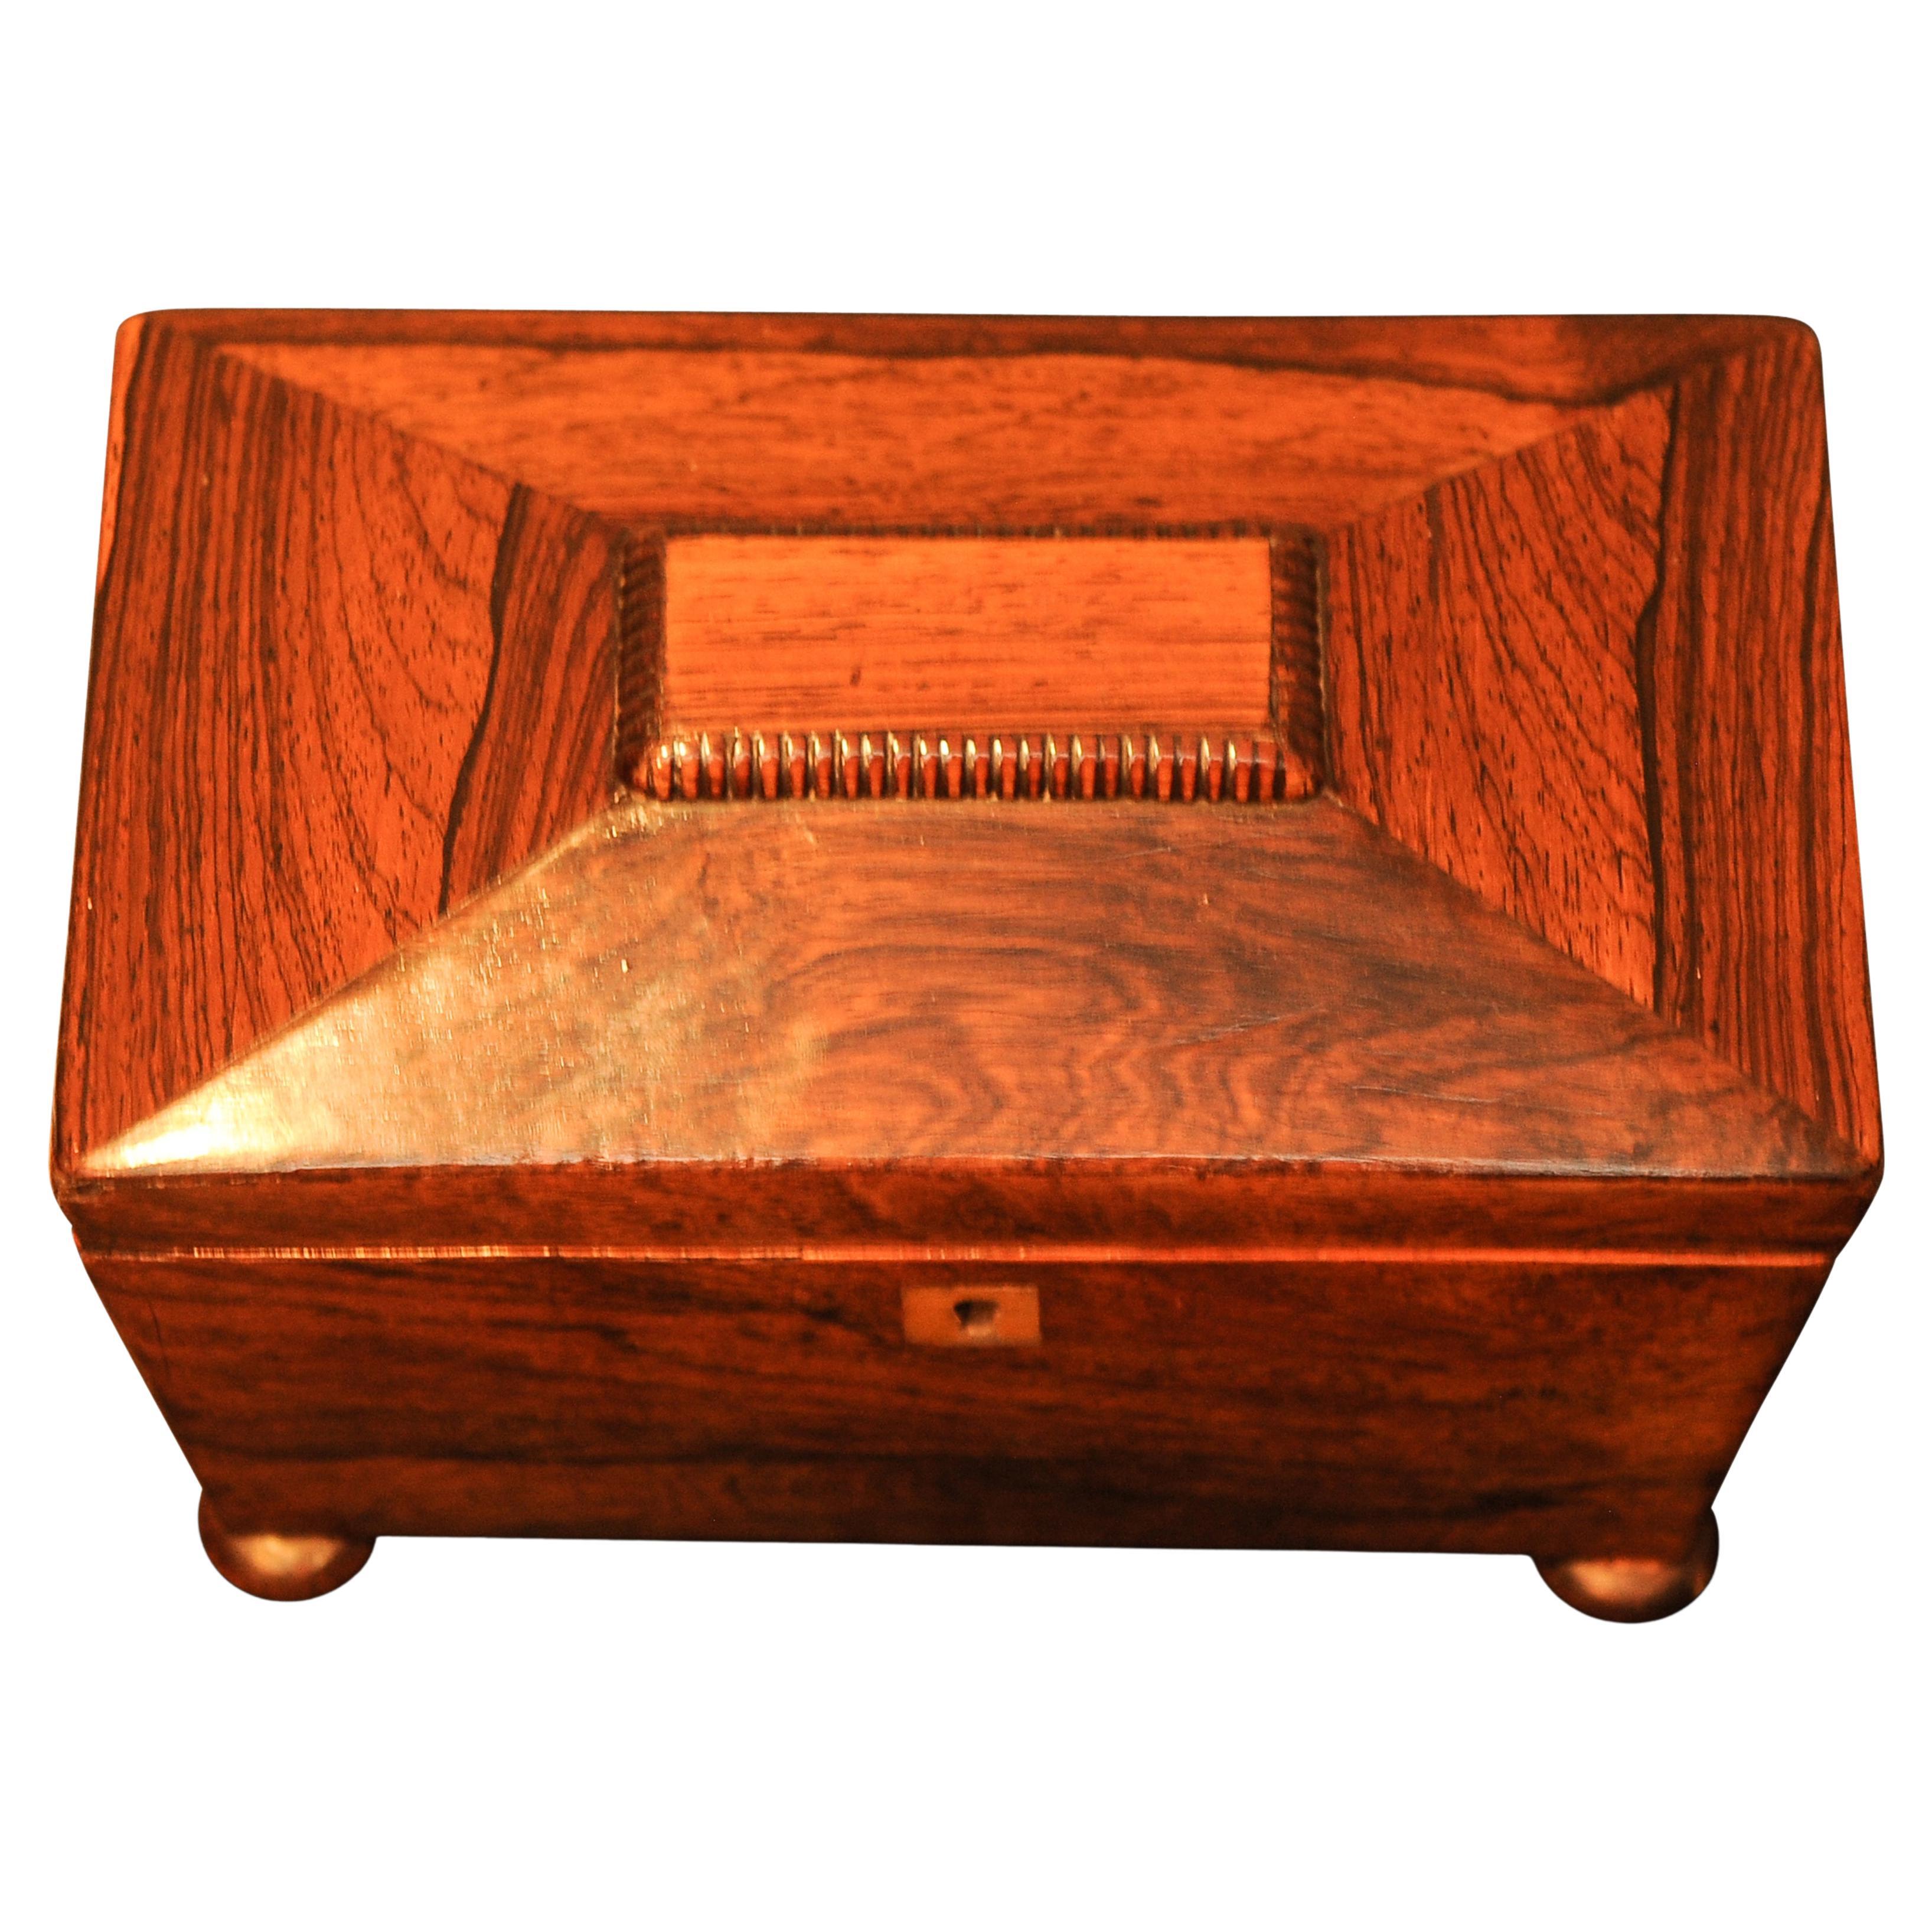 A Sarcophagus Shaped Regency Rosewood, Brass Tea Caddy With Two Separate Tea Compartments and Individual Handled Lids, Centred on Four Bun Feet Circa 1700's 

Great patina embellishing the age of the caddy.